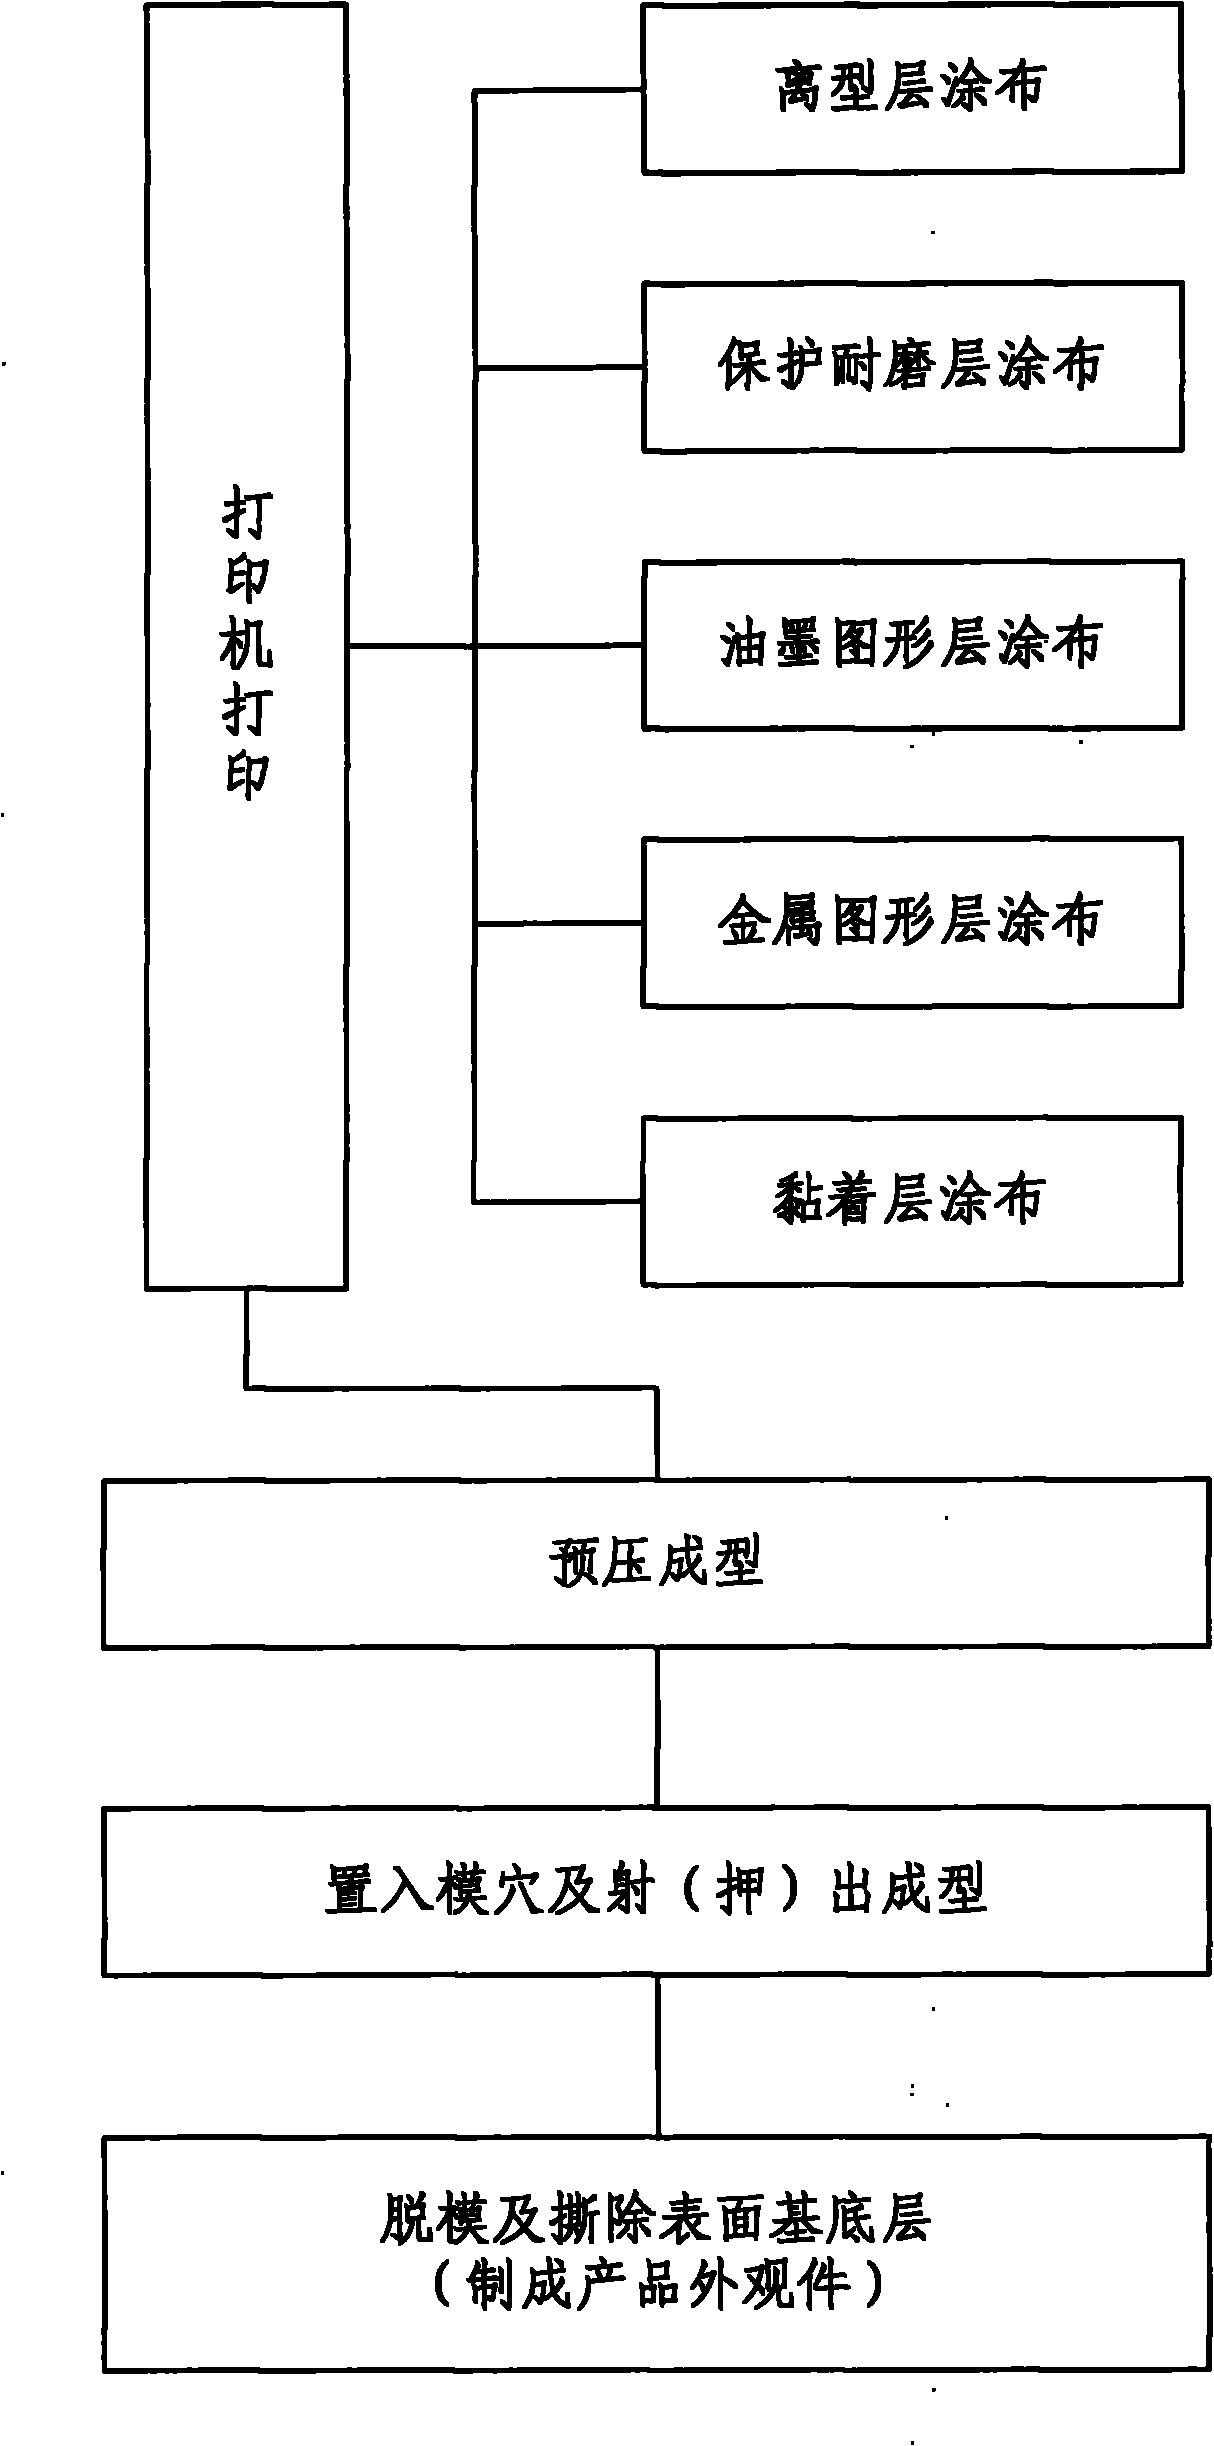 Method for printing prepressing in-mould transfer printing films and in-mould decorative films by using a printer